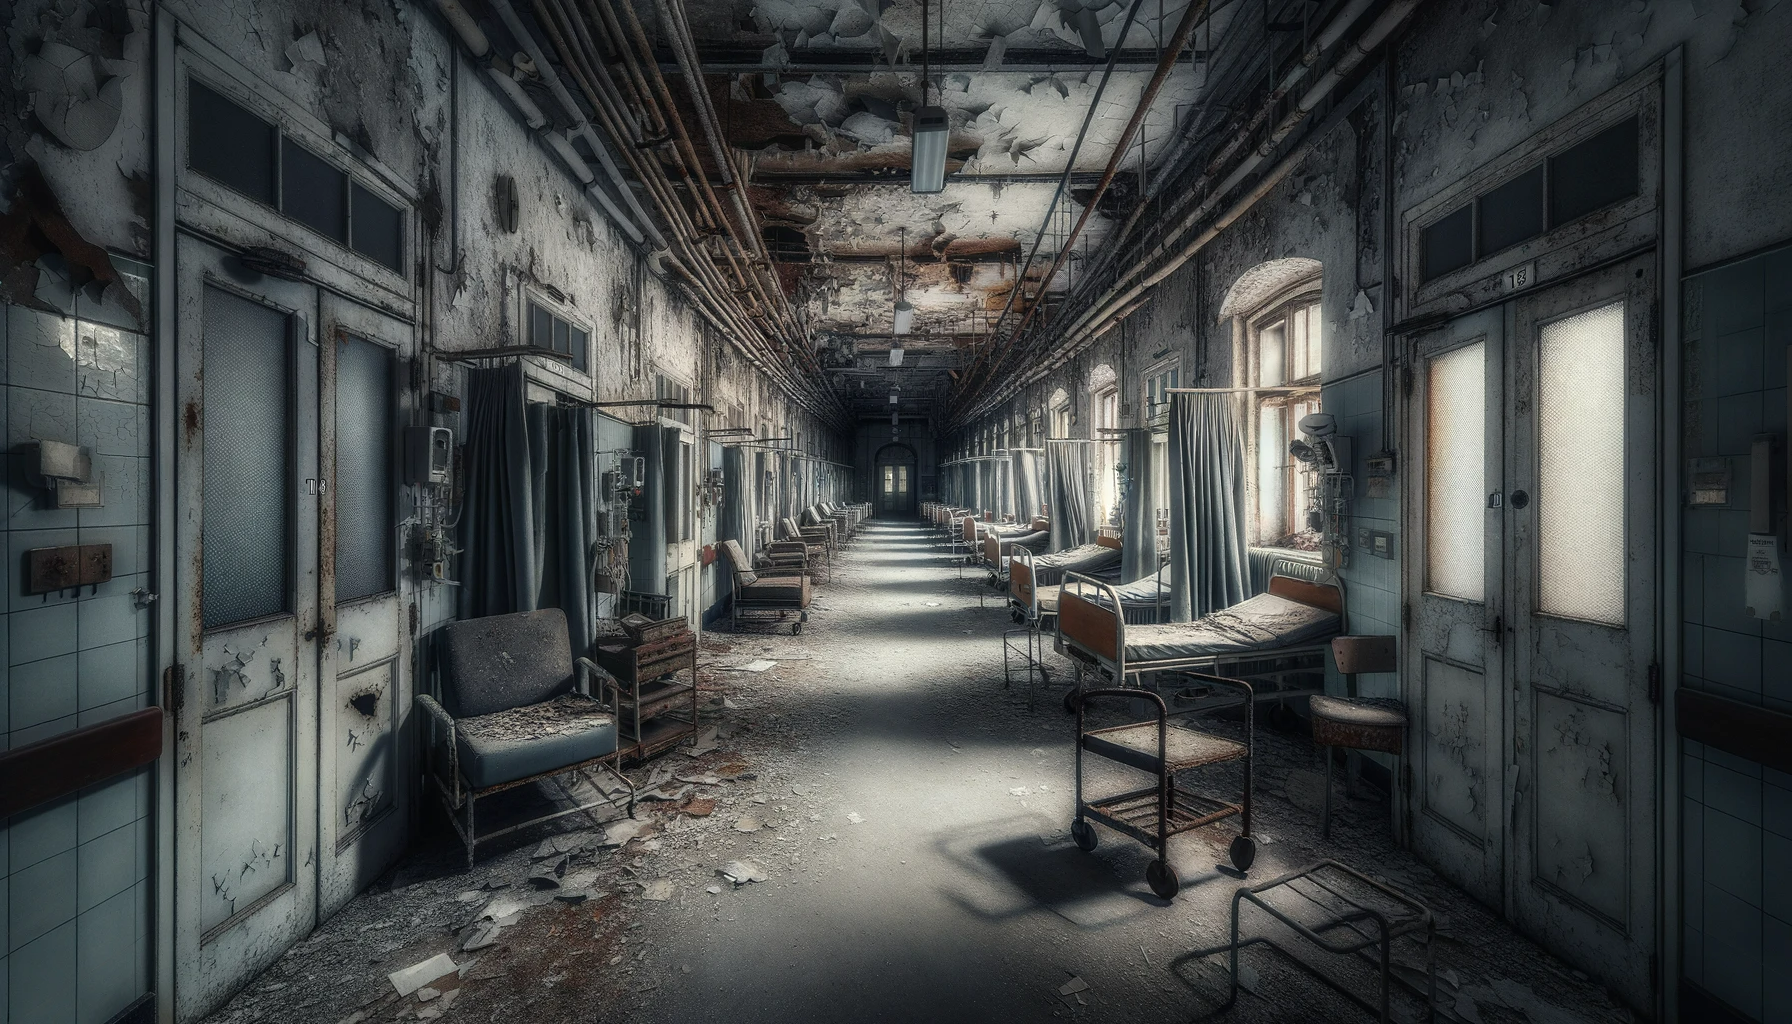 DALL·E 2024 01 25 10.47.21 An abandoned hospital ward depicting a haunting and deserted atmosphere. The image shows a long empty corridor with doors ajar leading to forsaken